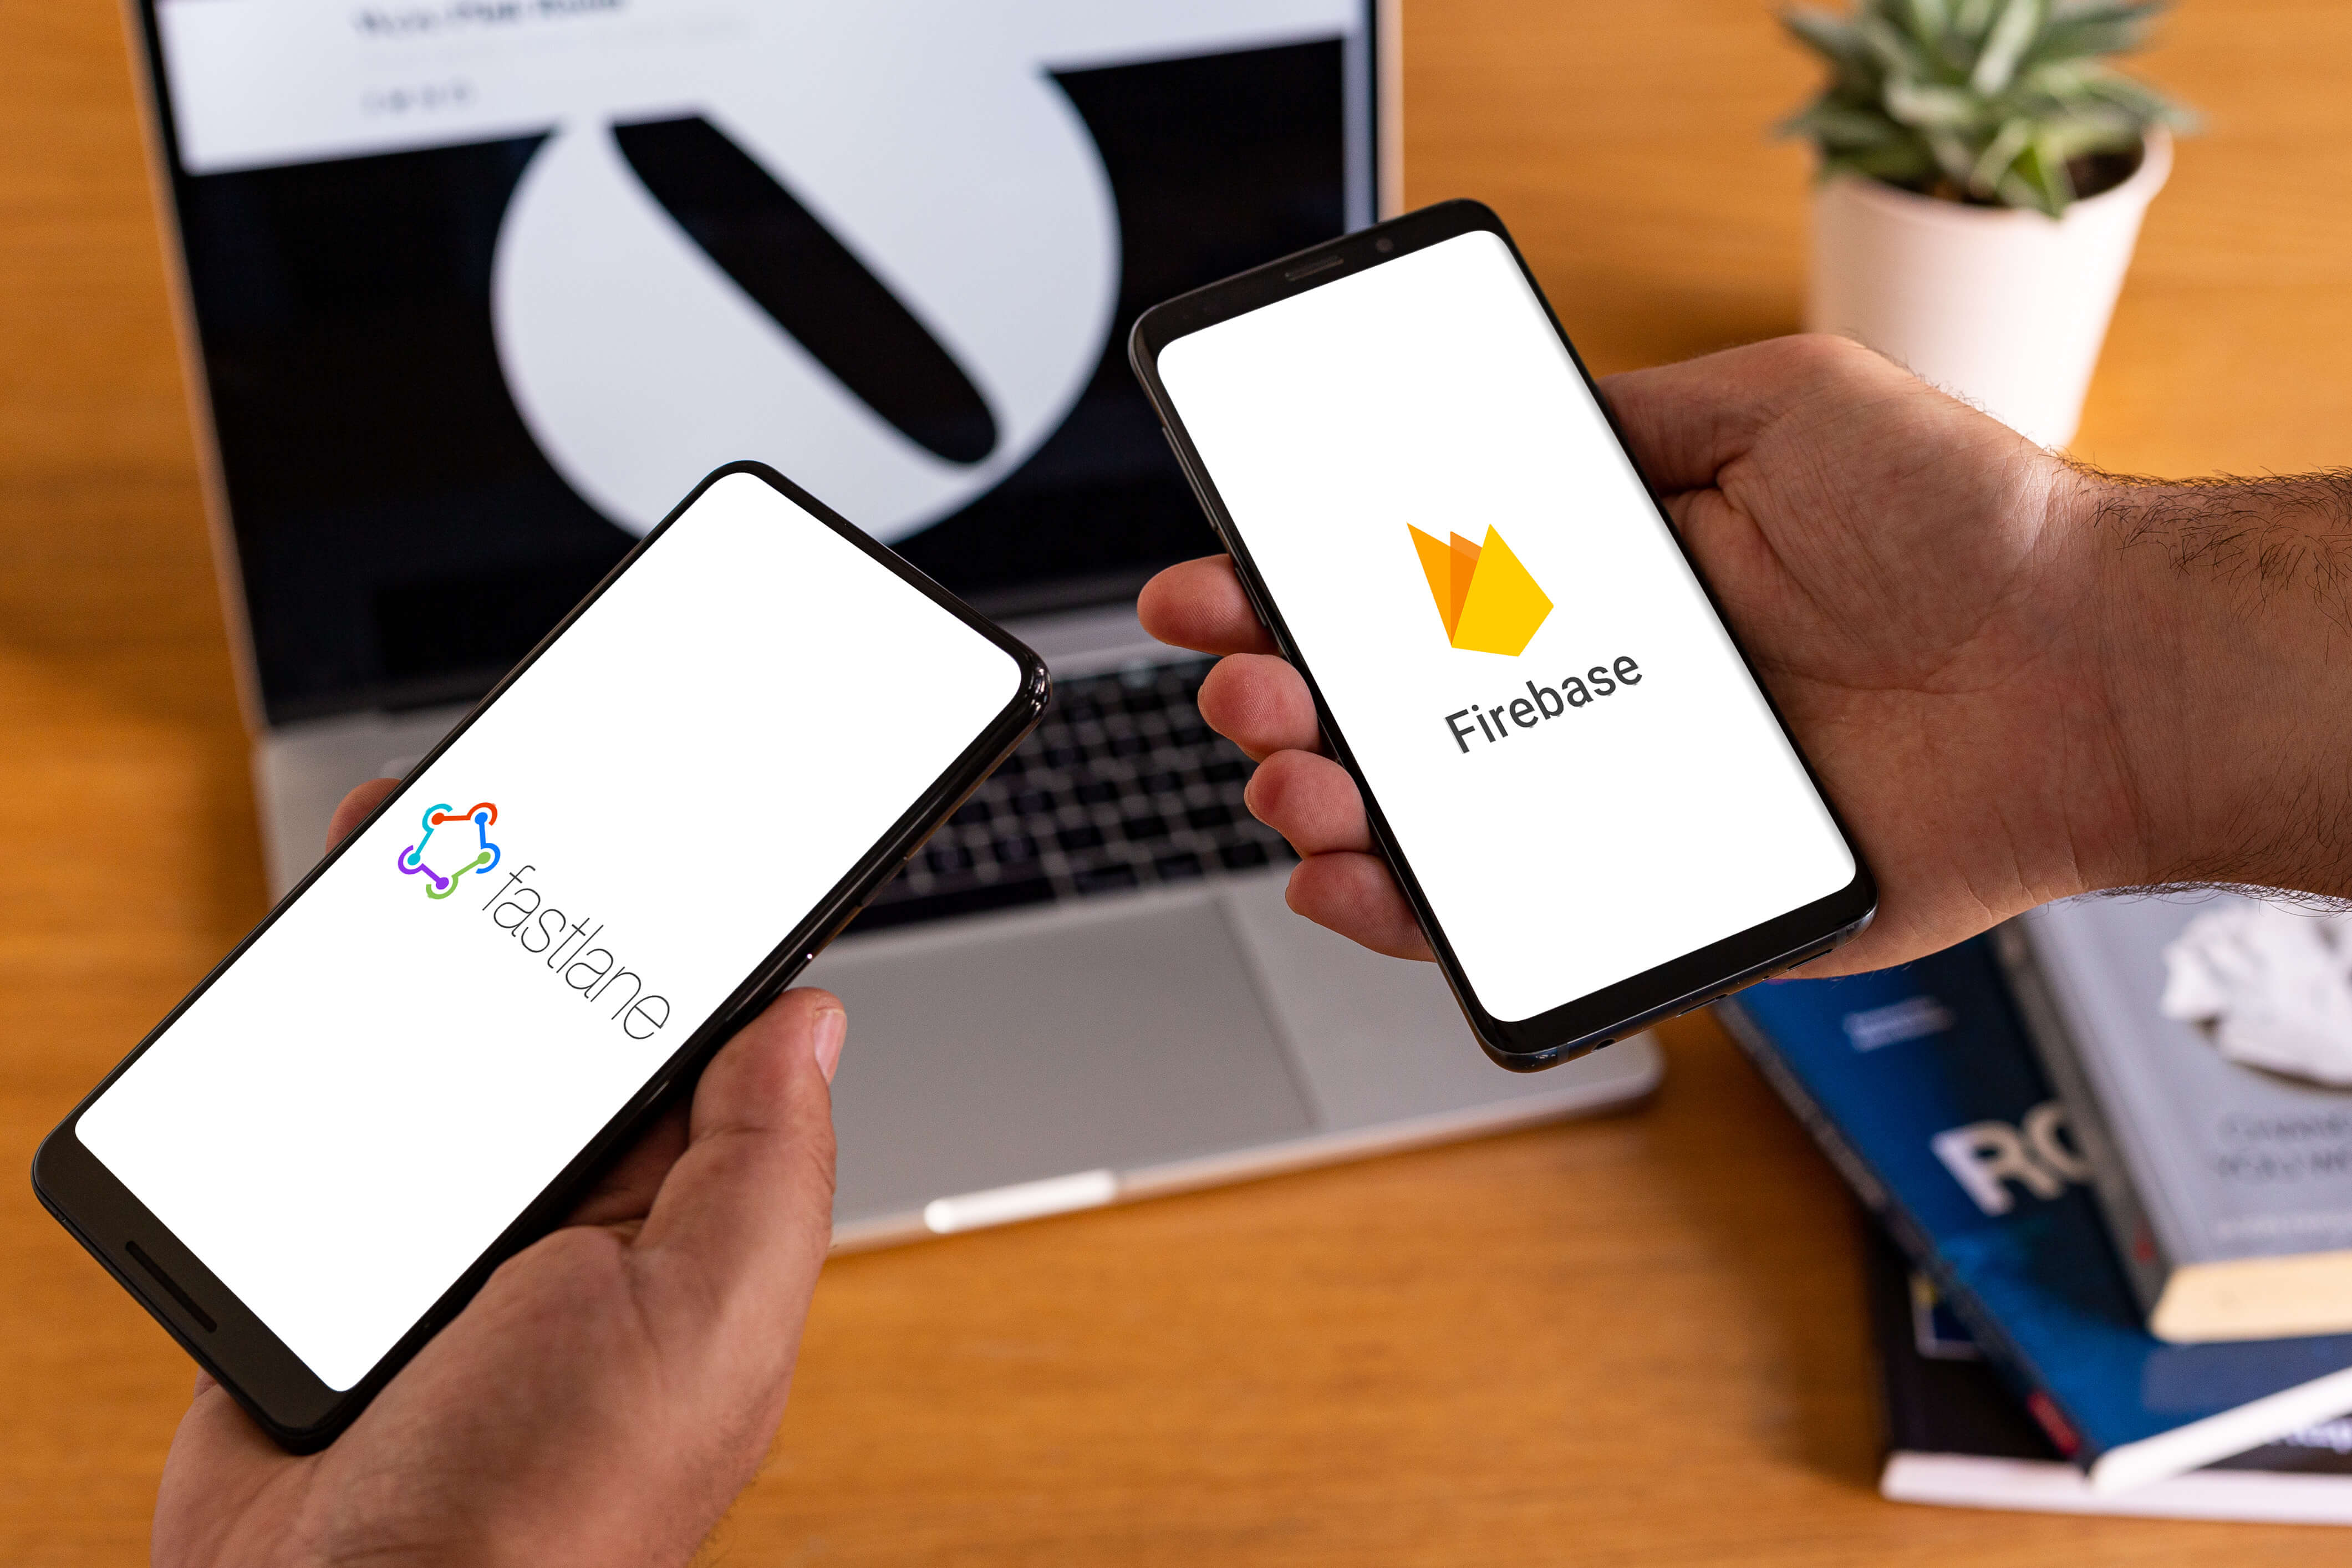 Two smartphones with the fastlane and firebase logos, with a mac laptop, books and a plant in the background